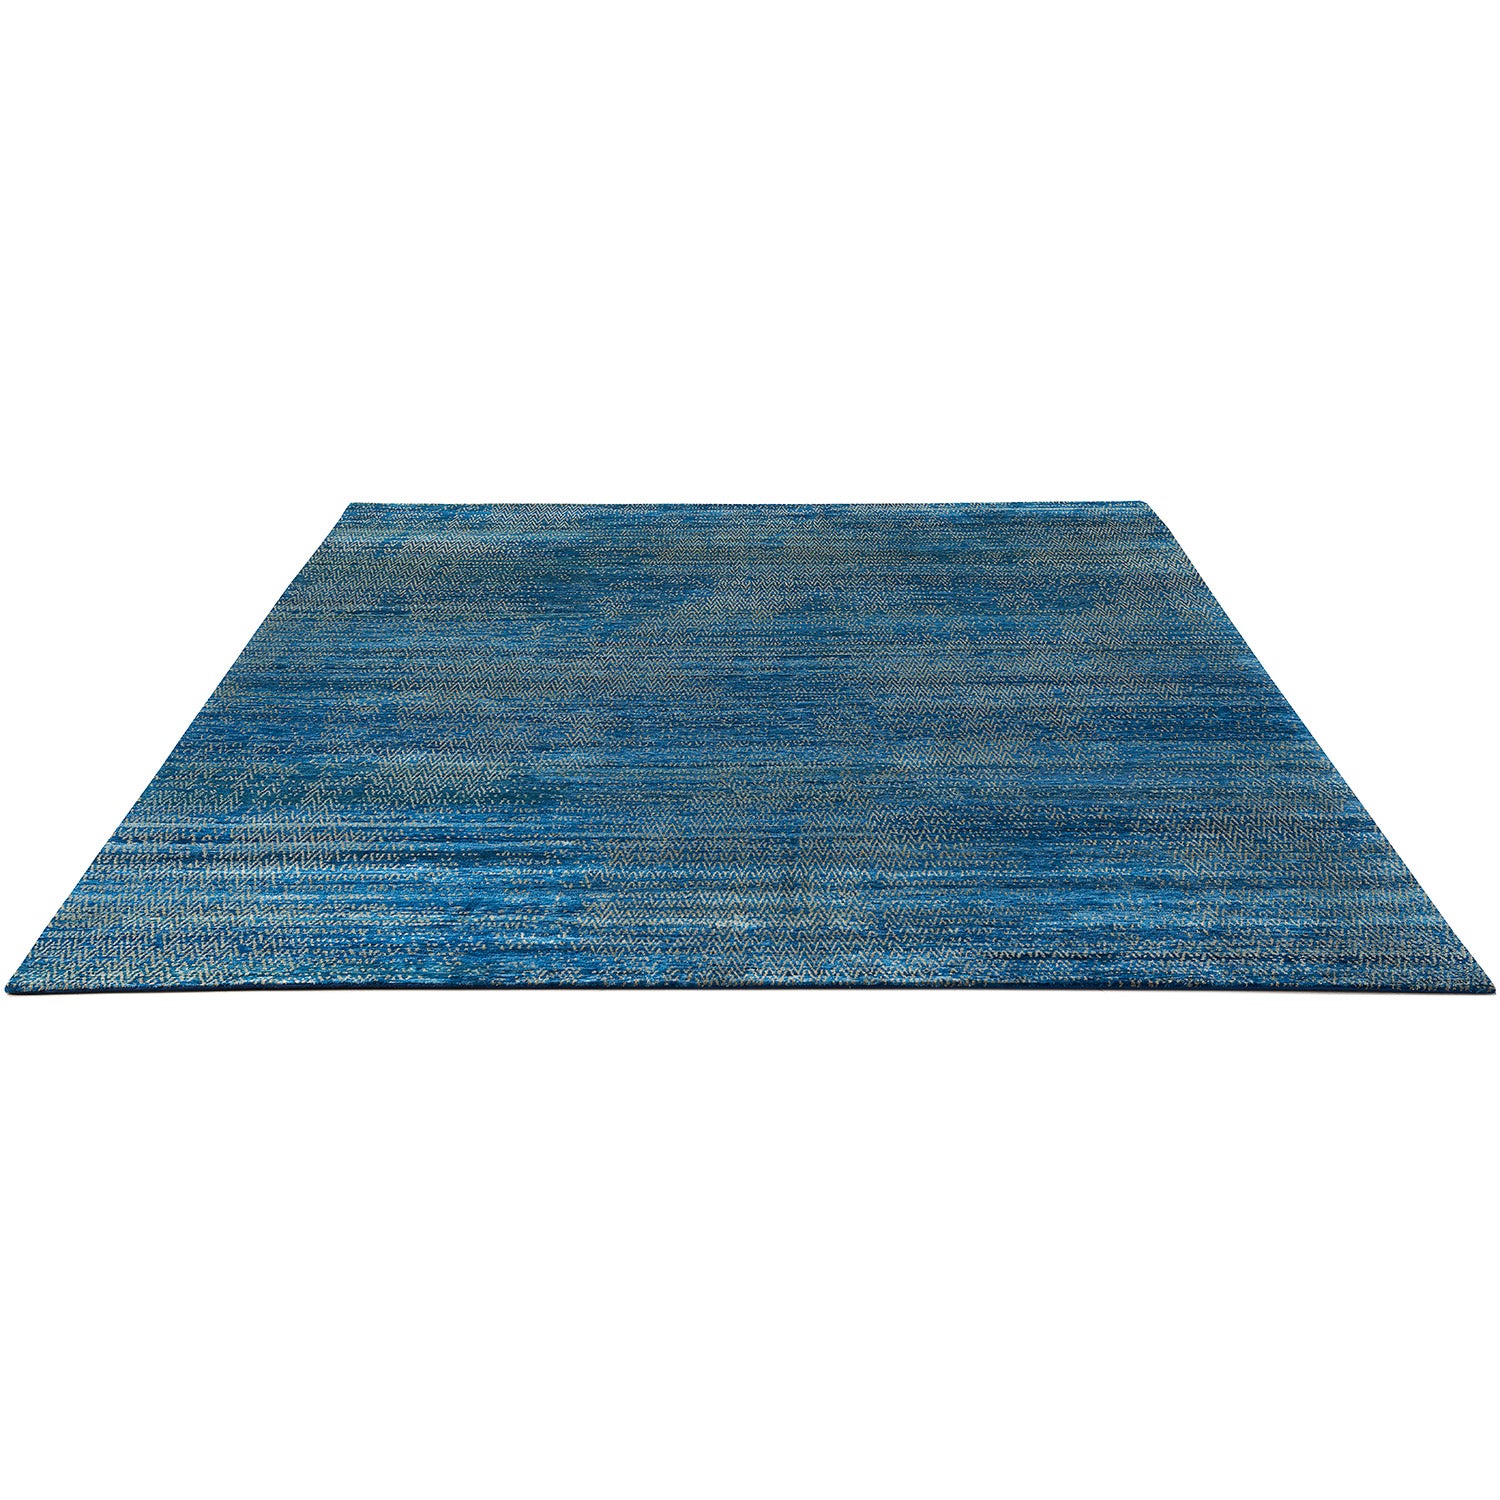 Close-up of a textured blue rug with varying shades and patterns.